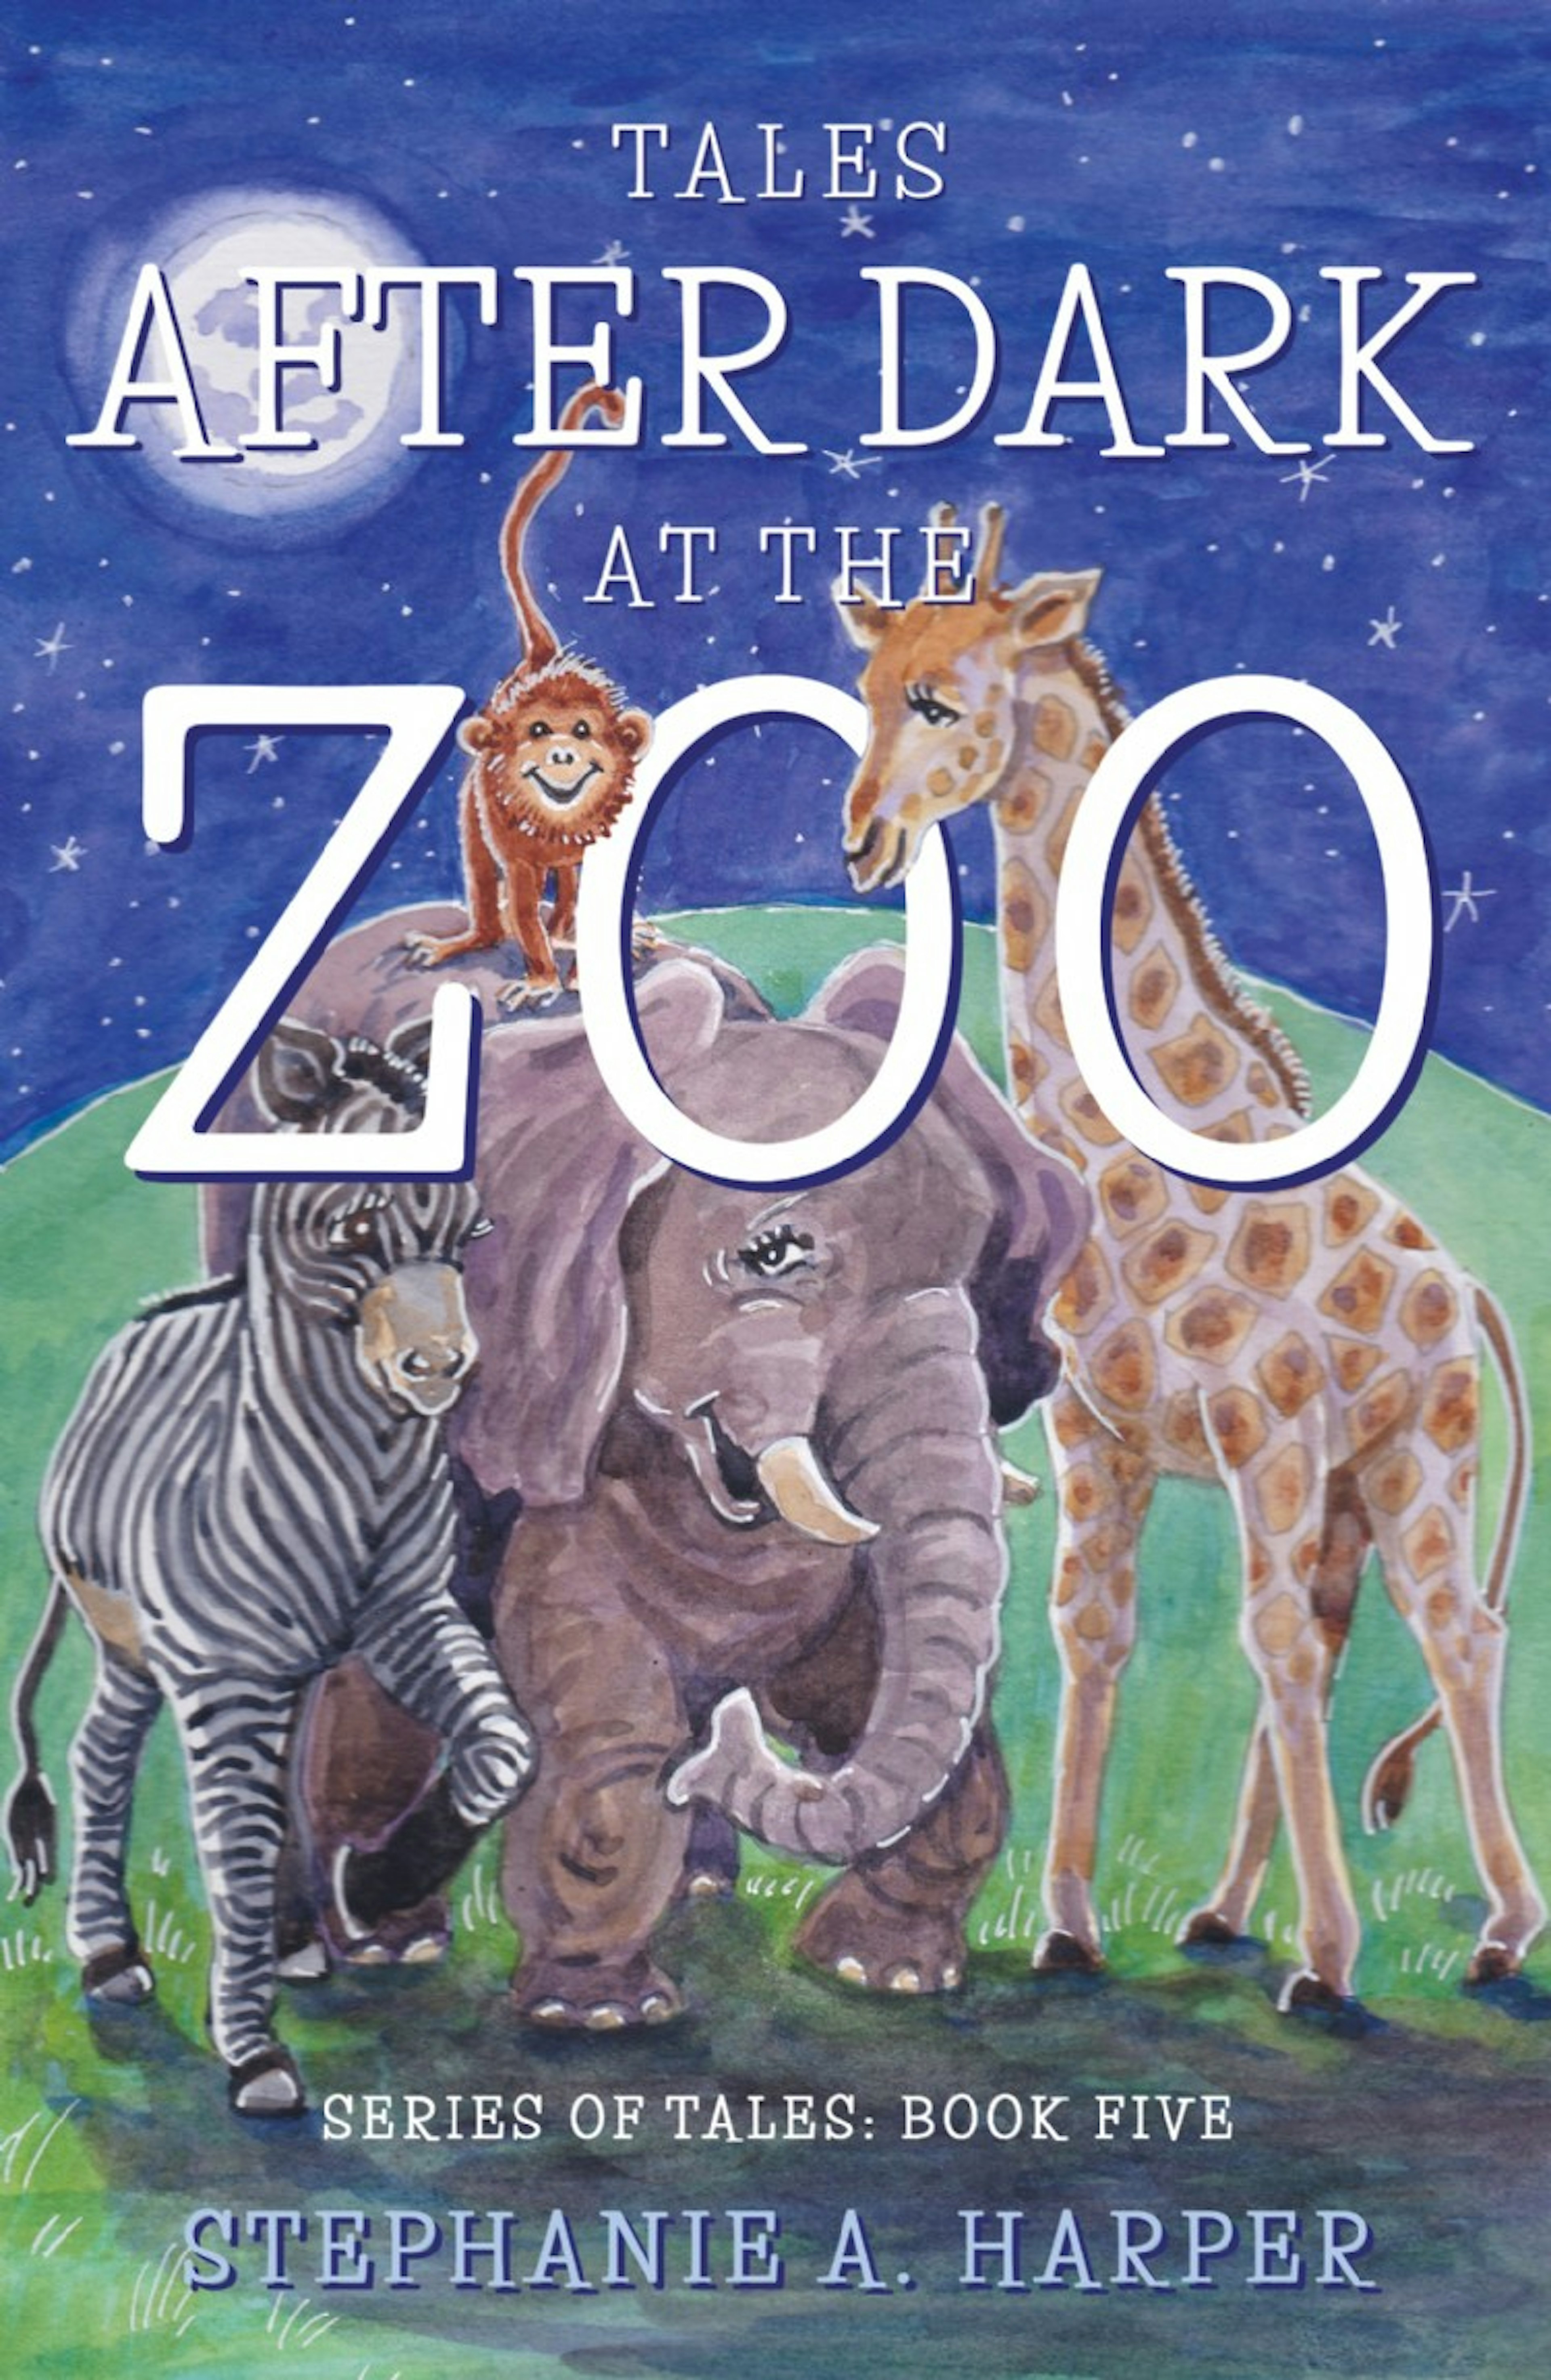 Tales After Dark at the Zoo